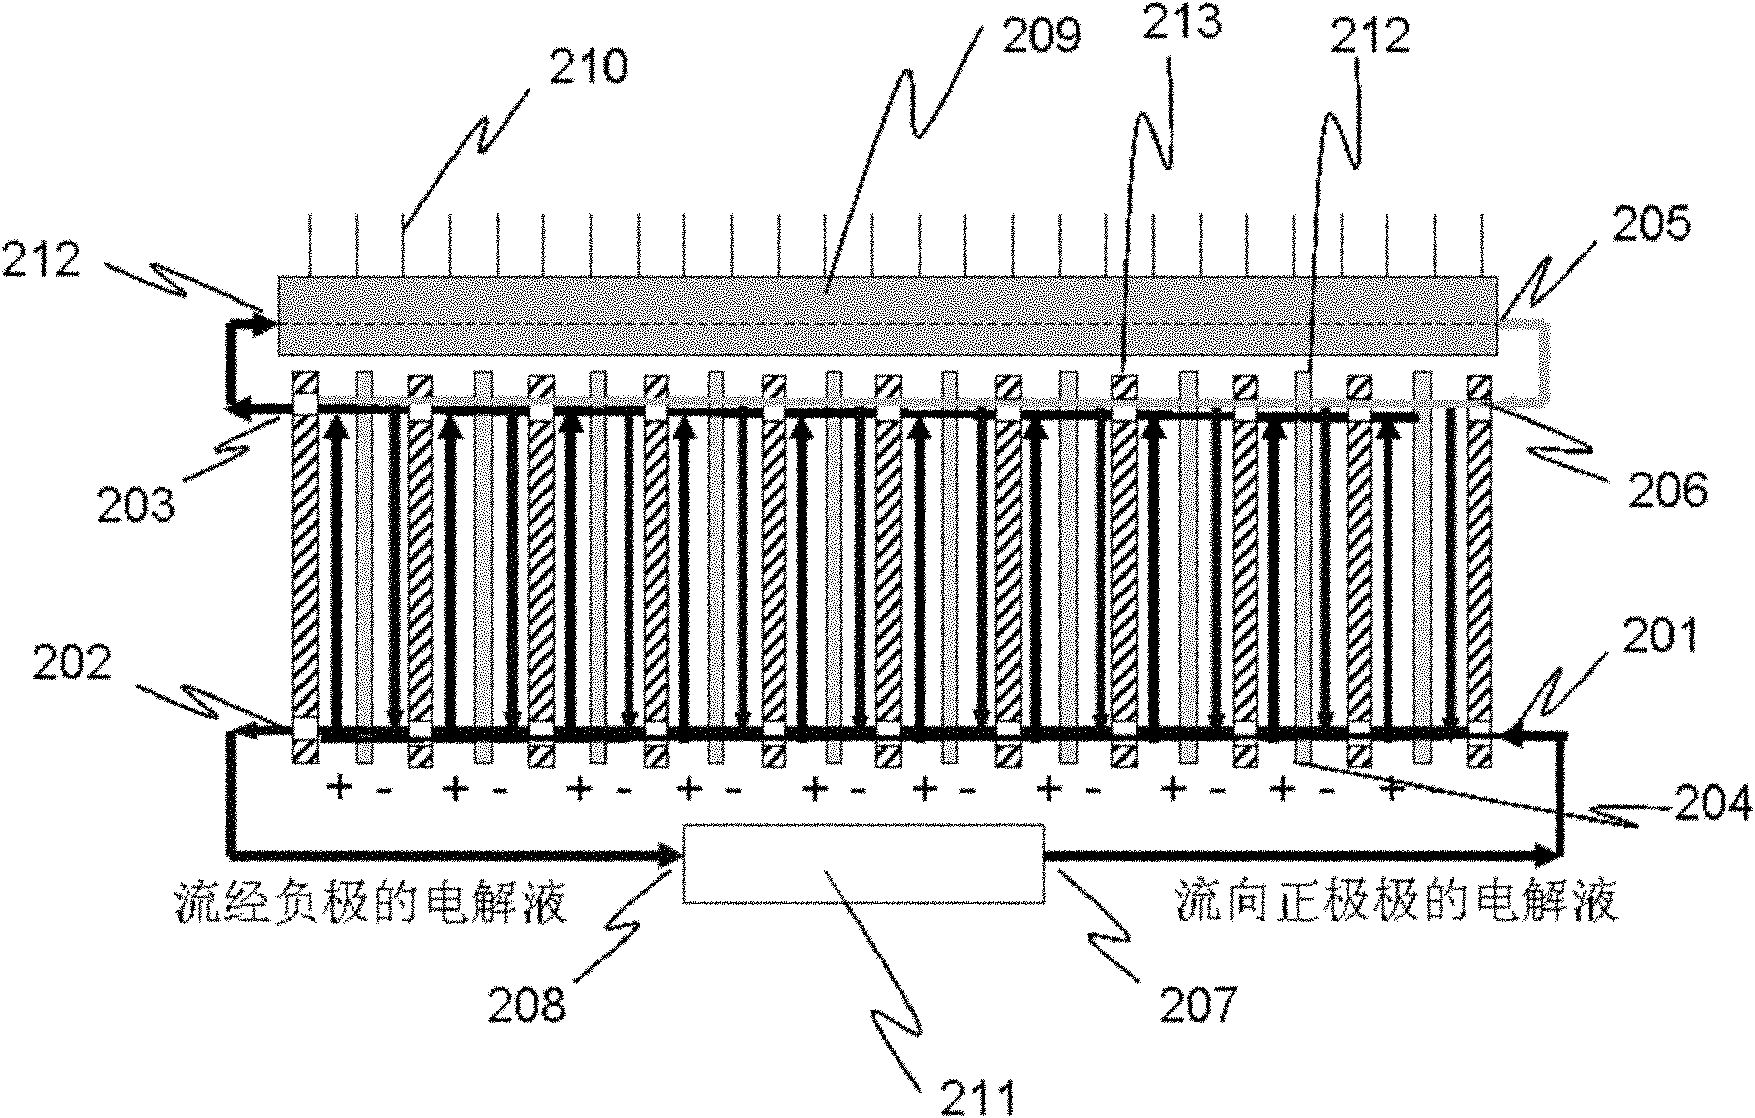 High-power lithium ion battery system with laminated battery structure